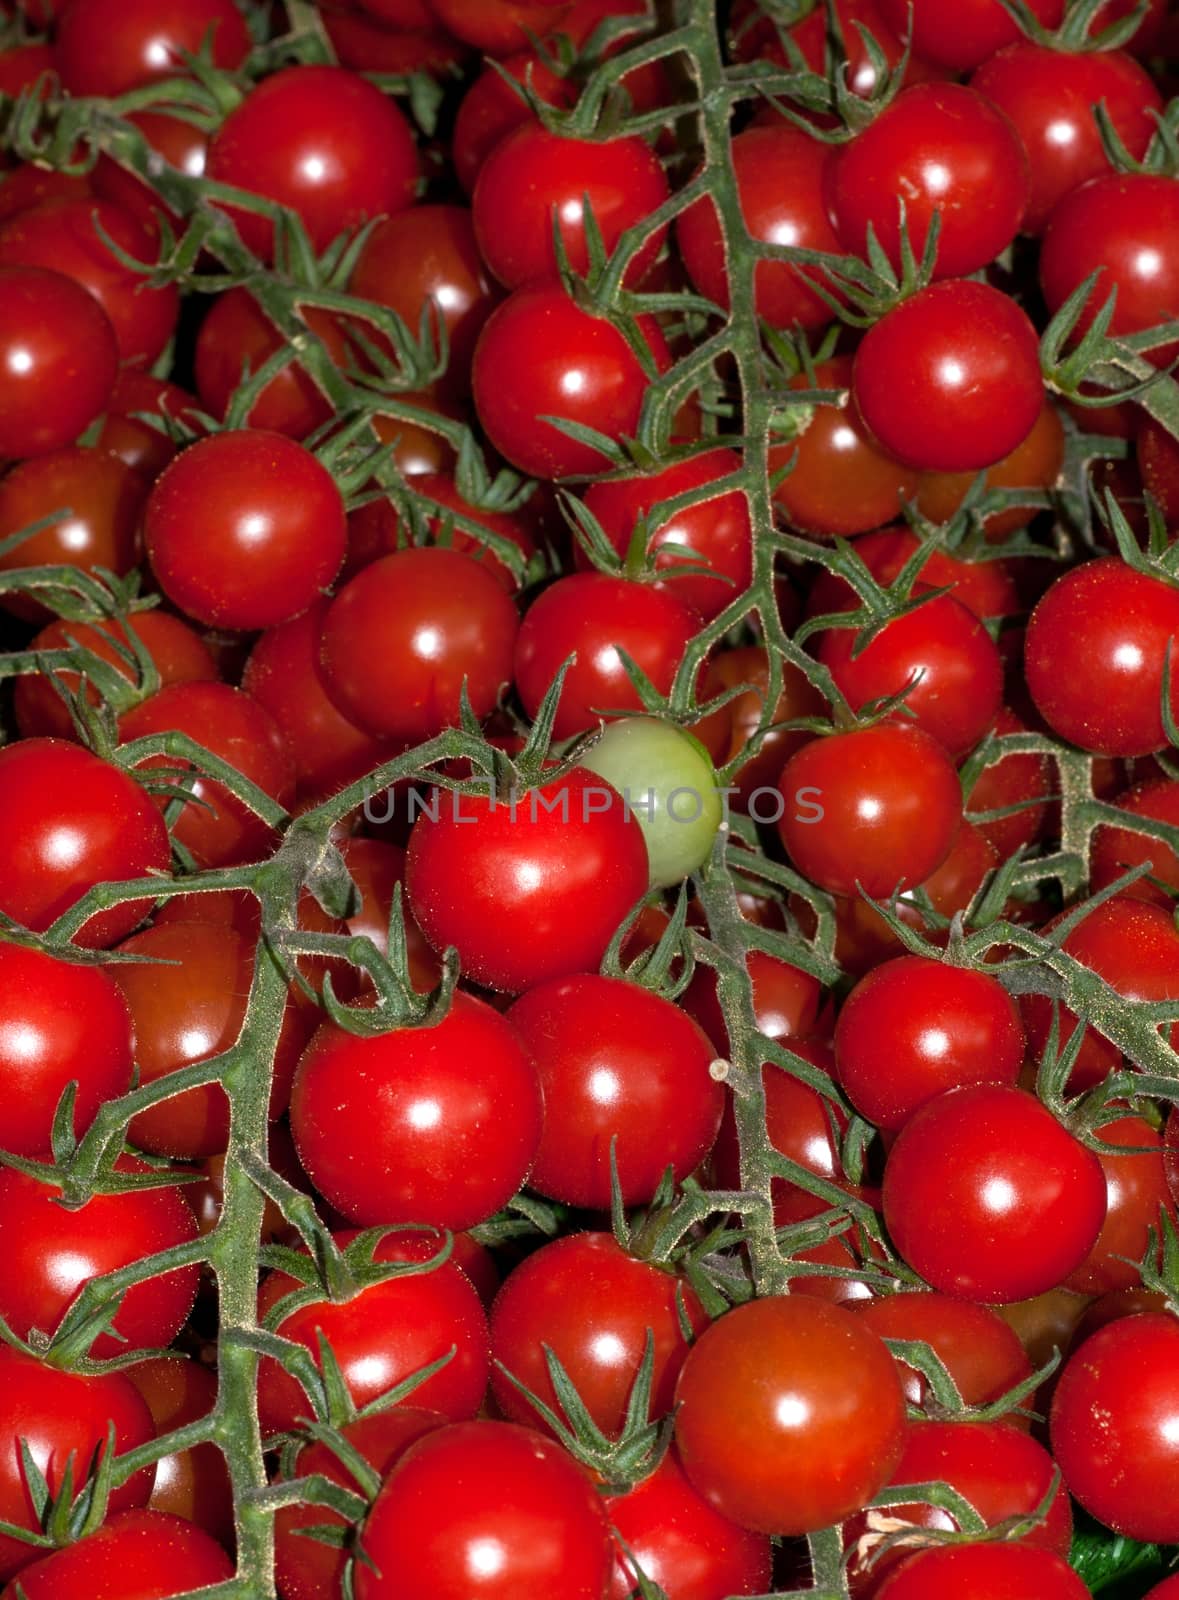 Cherry Tomatoes on the vine by TimAwe